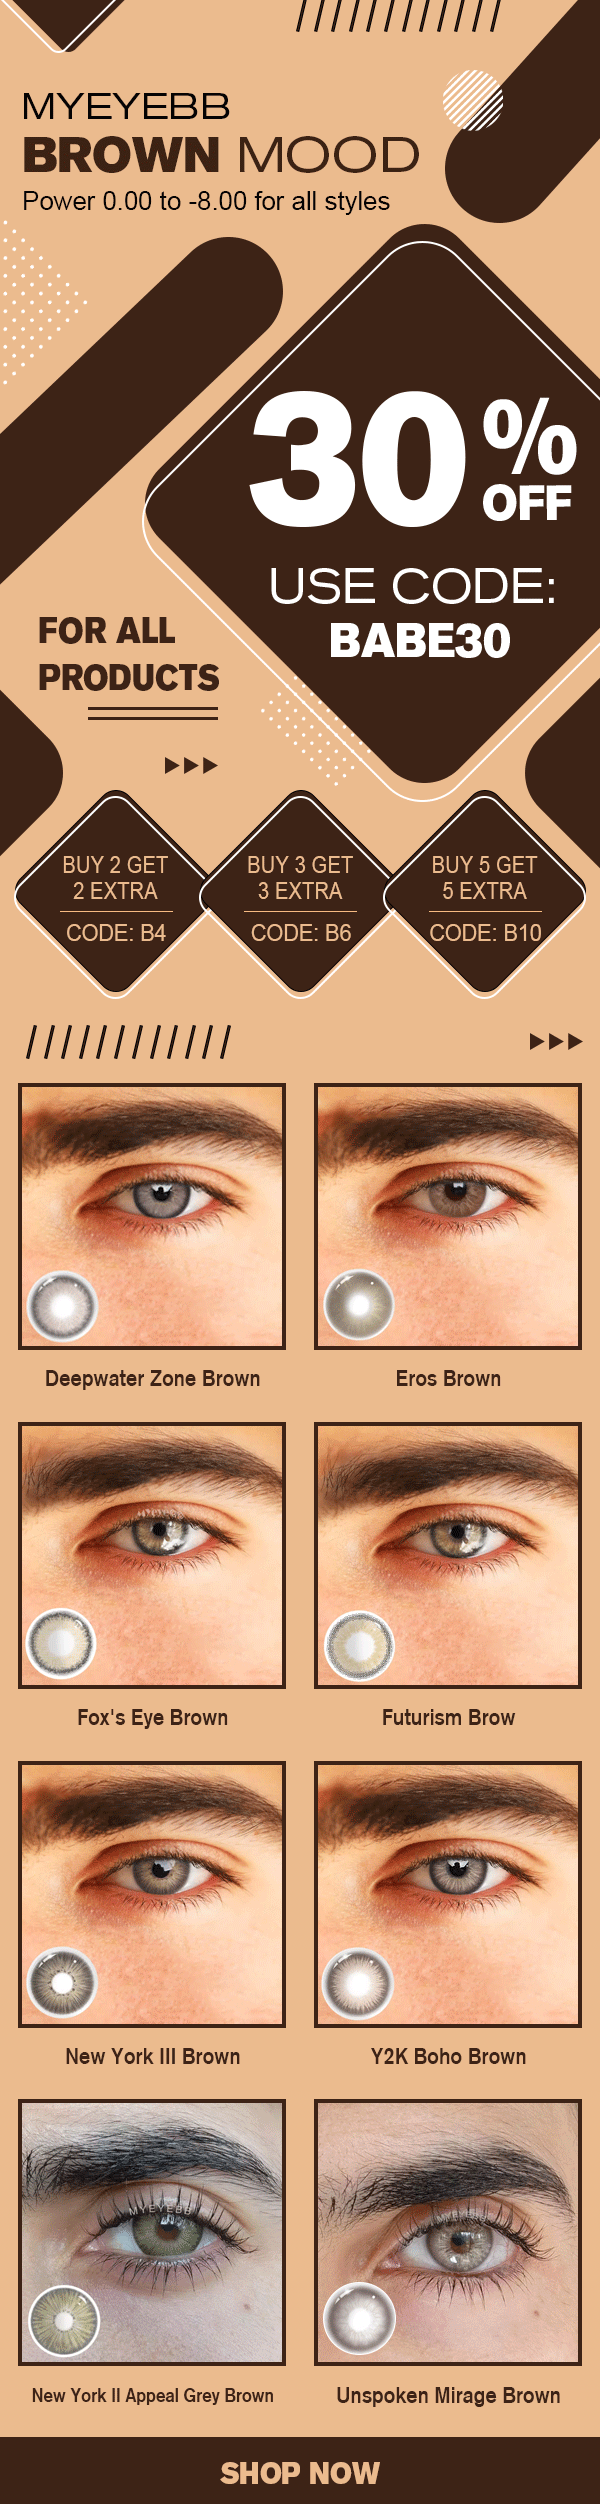  4 HELETELTLTTT MYEYEBB BROWN MOOD Power 0.00 to -8.00 for all styles 302% USE CODE: FOR ALL BABE30 PRODUCTS 444 BUY 5 GET KE24Q1 CODE: B10, BUY 3 GET 1S4 CODE: B6 BUY 2 GET 2 EXTRA I New York Il Appeal Grey Brown Unspoken Mirage Brown 